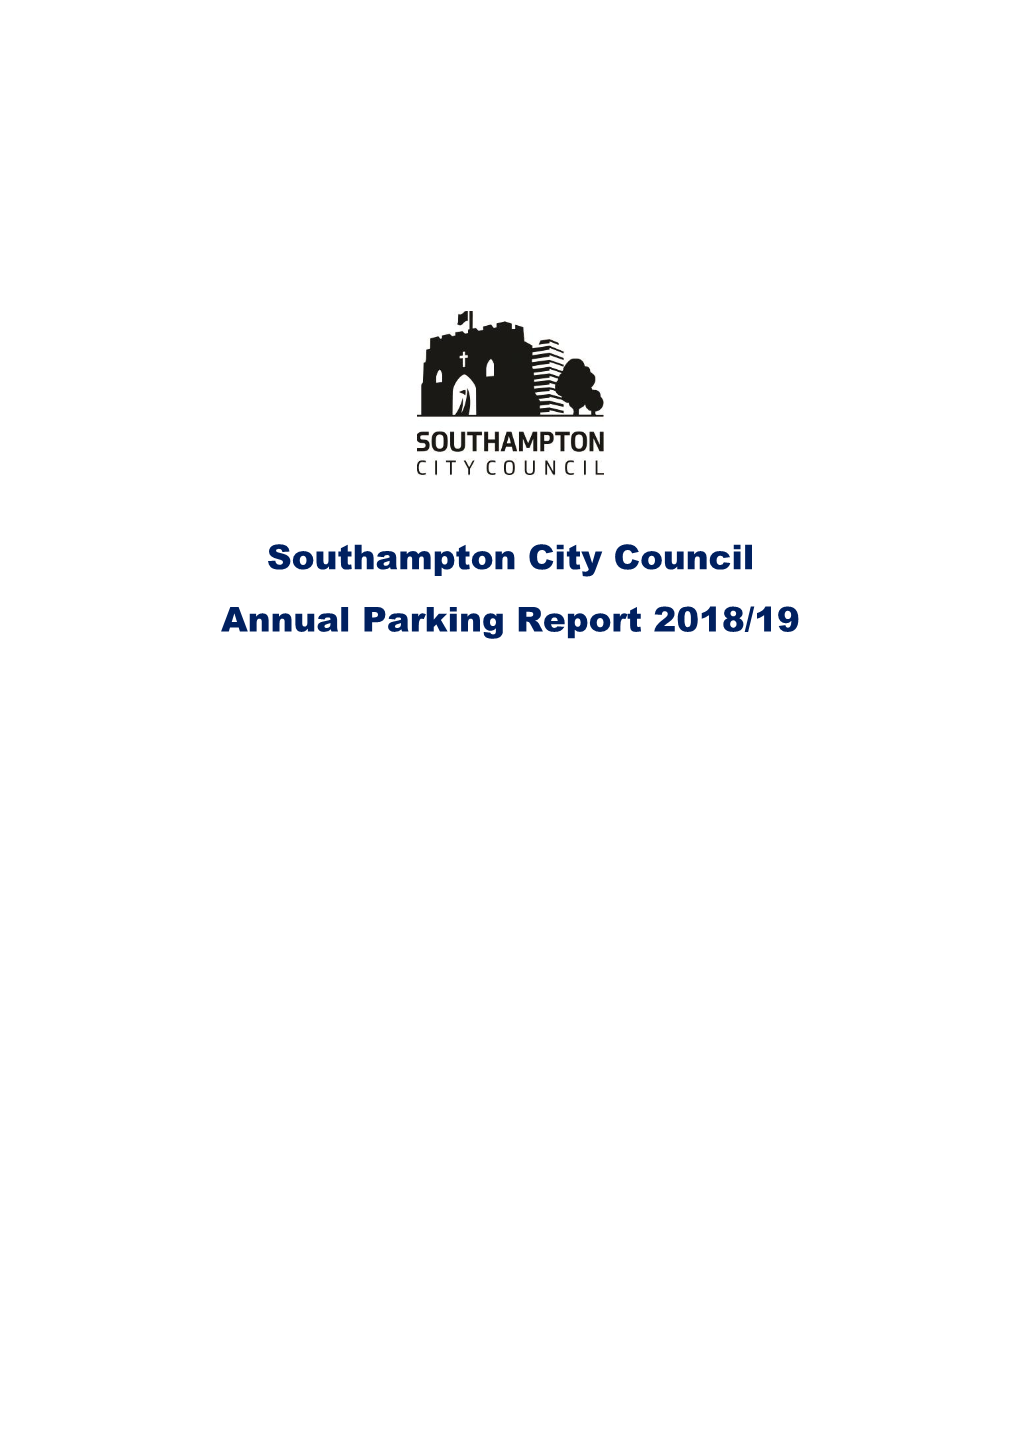 Annual Parking Report 2018/19